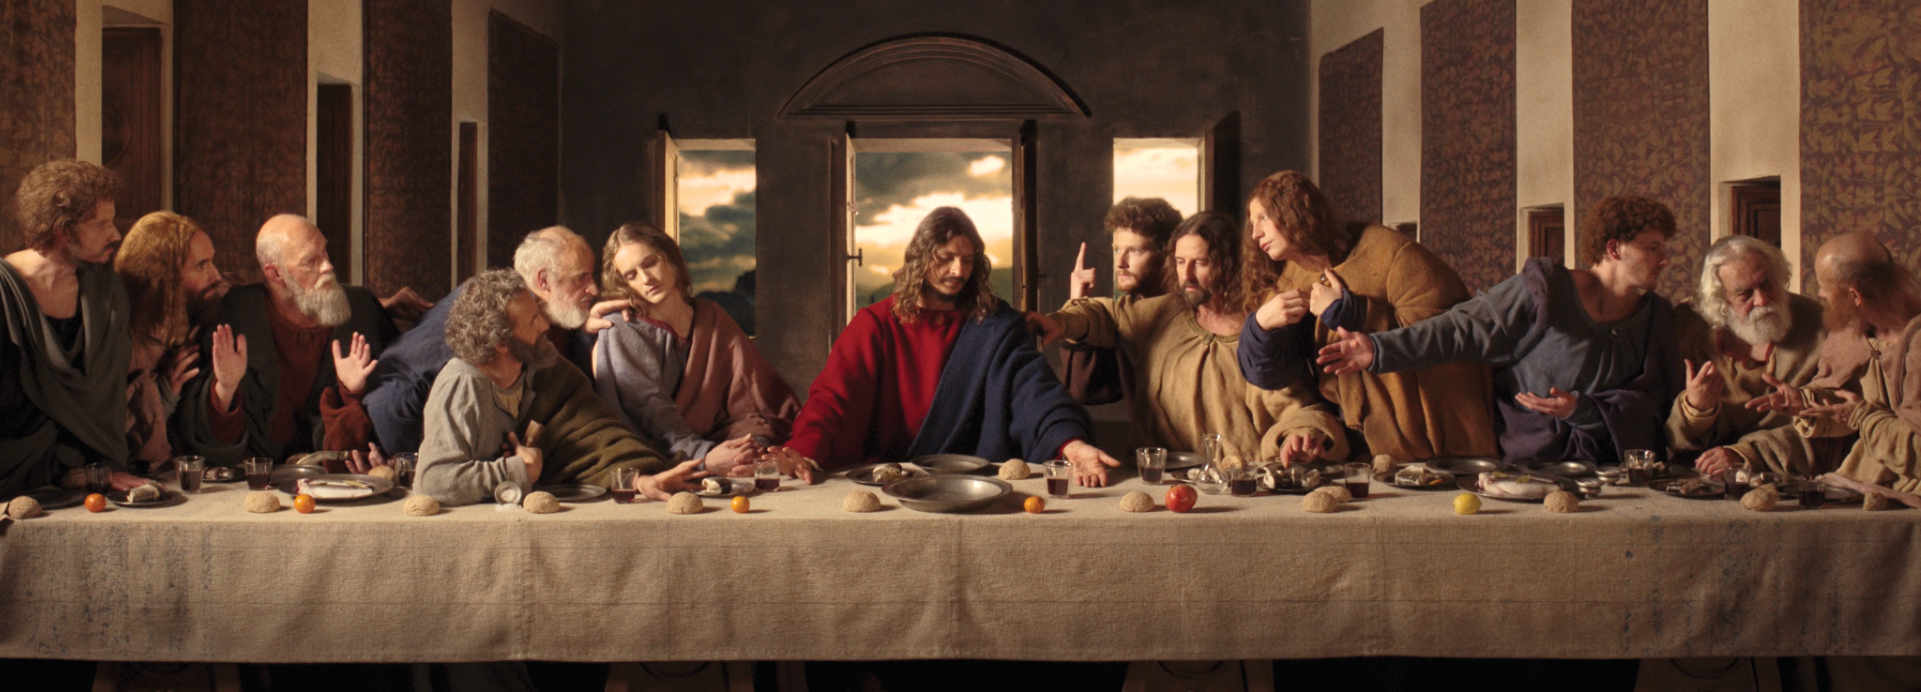 The Last Supper: The Living Tableau, created and directed by Armondo Linus Acosta, with his dream creative team of cinematographer Vittorio Storaro, set designer Dante Ferretti and set decorator Francesca Lo Schiavo — all three-time Academy Award® winners — brings Leonardo’s masterpiece to life in exacting detail. The nine-minute film portrays the drama, emotion and subtle nuance of the Apostles’ inner lives during history’s most important gathering.